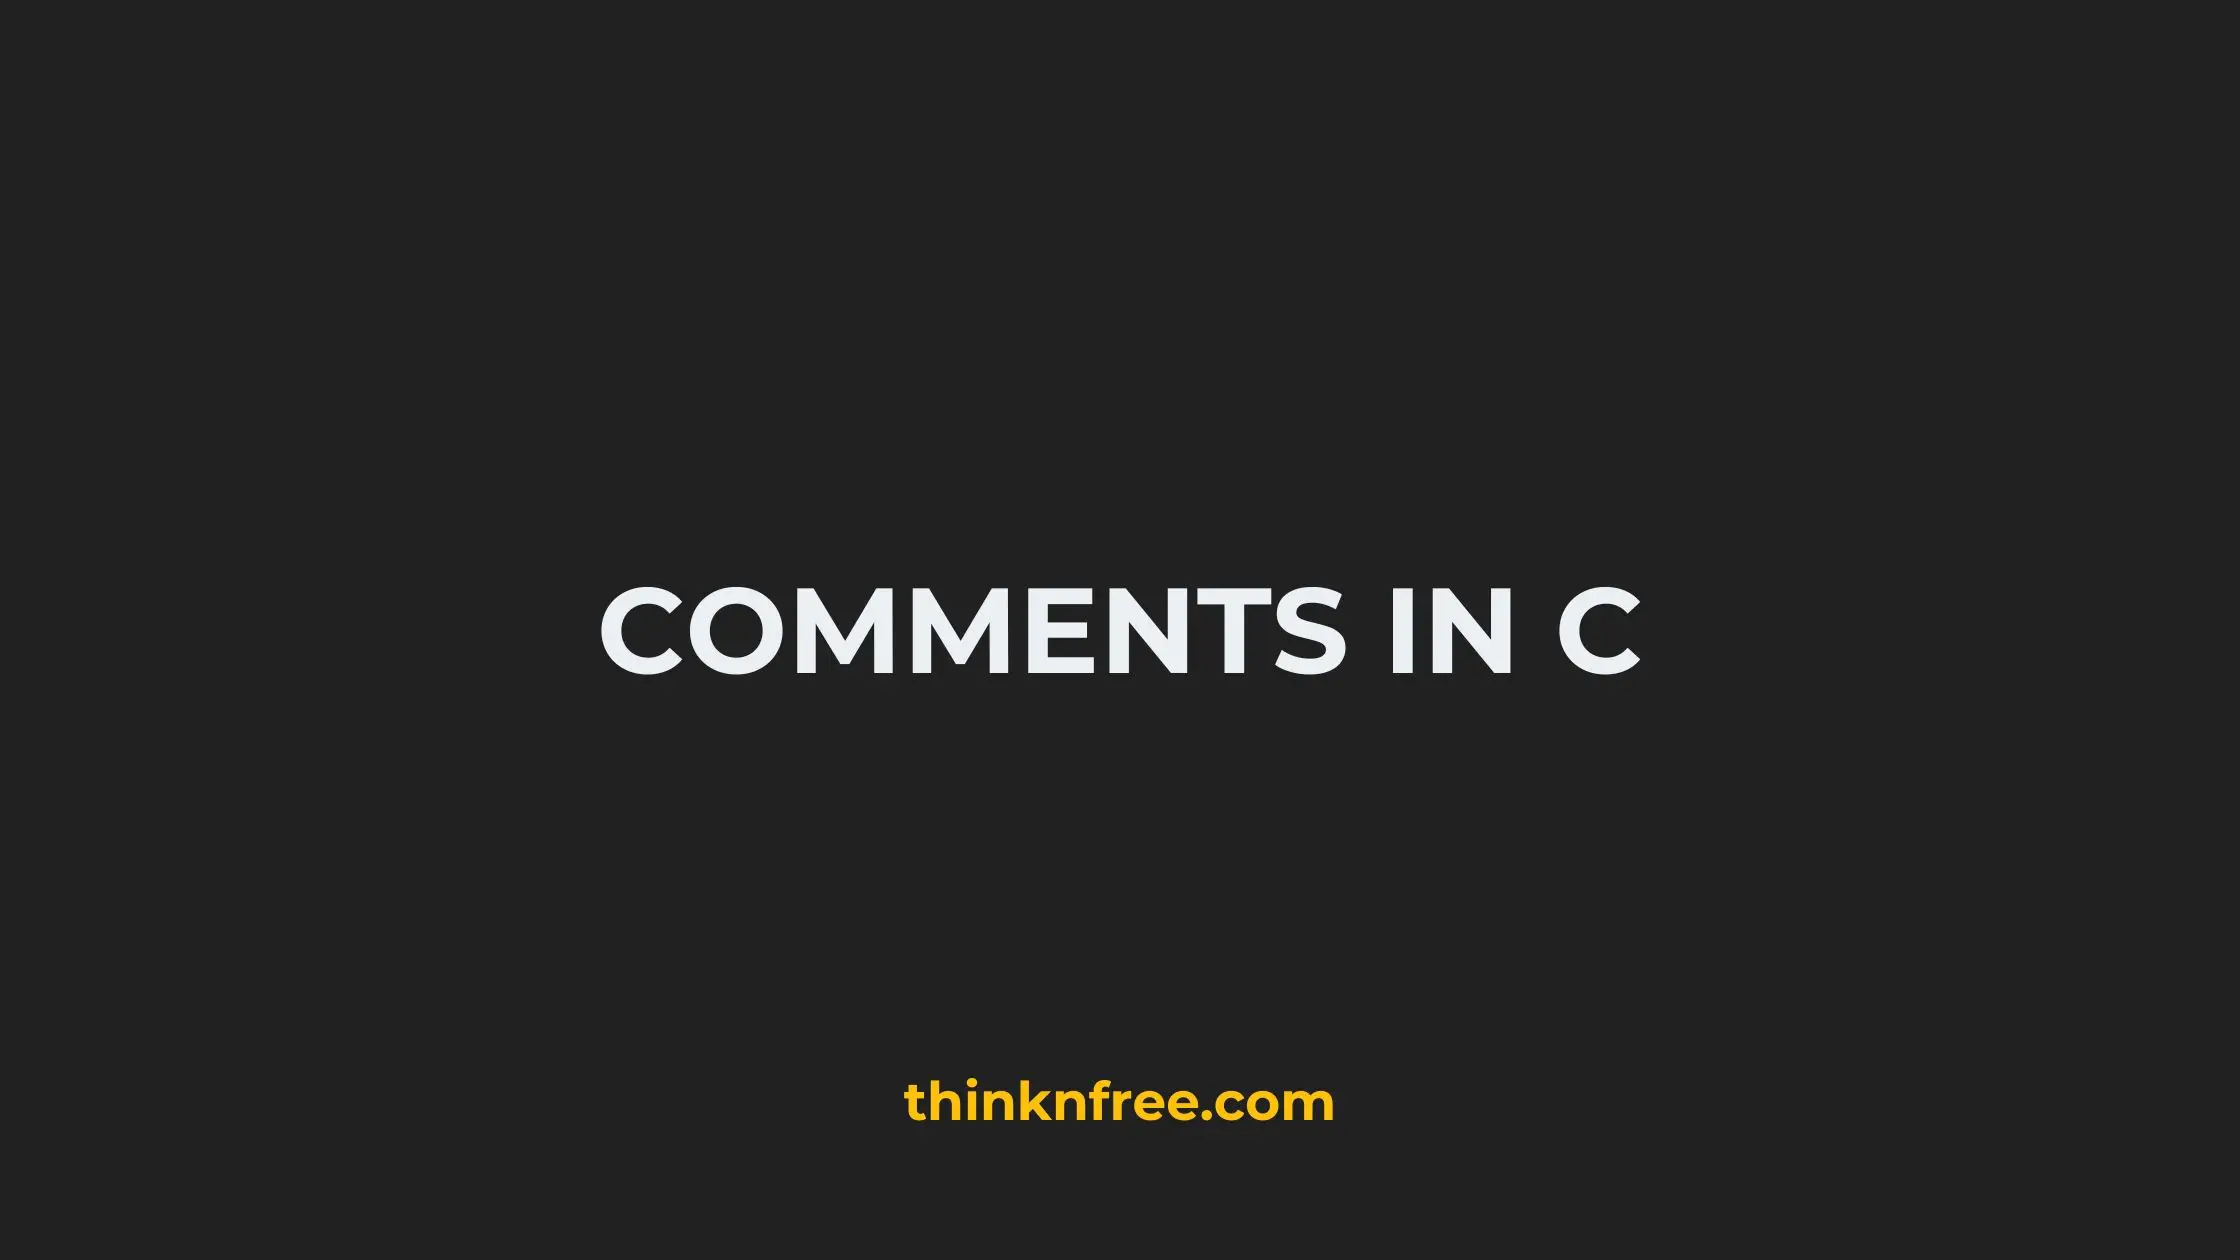 How to use comments in C